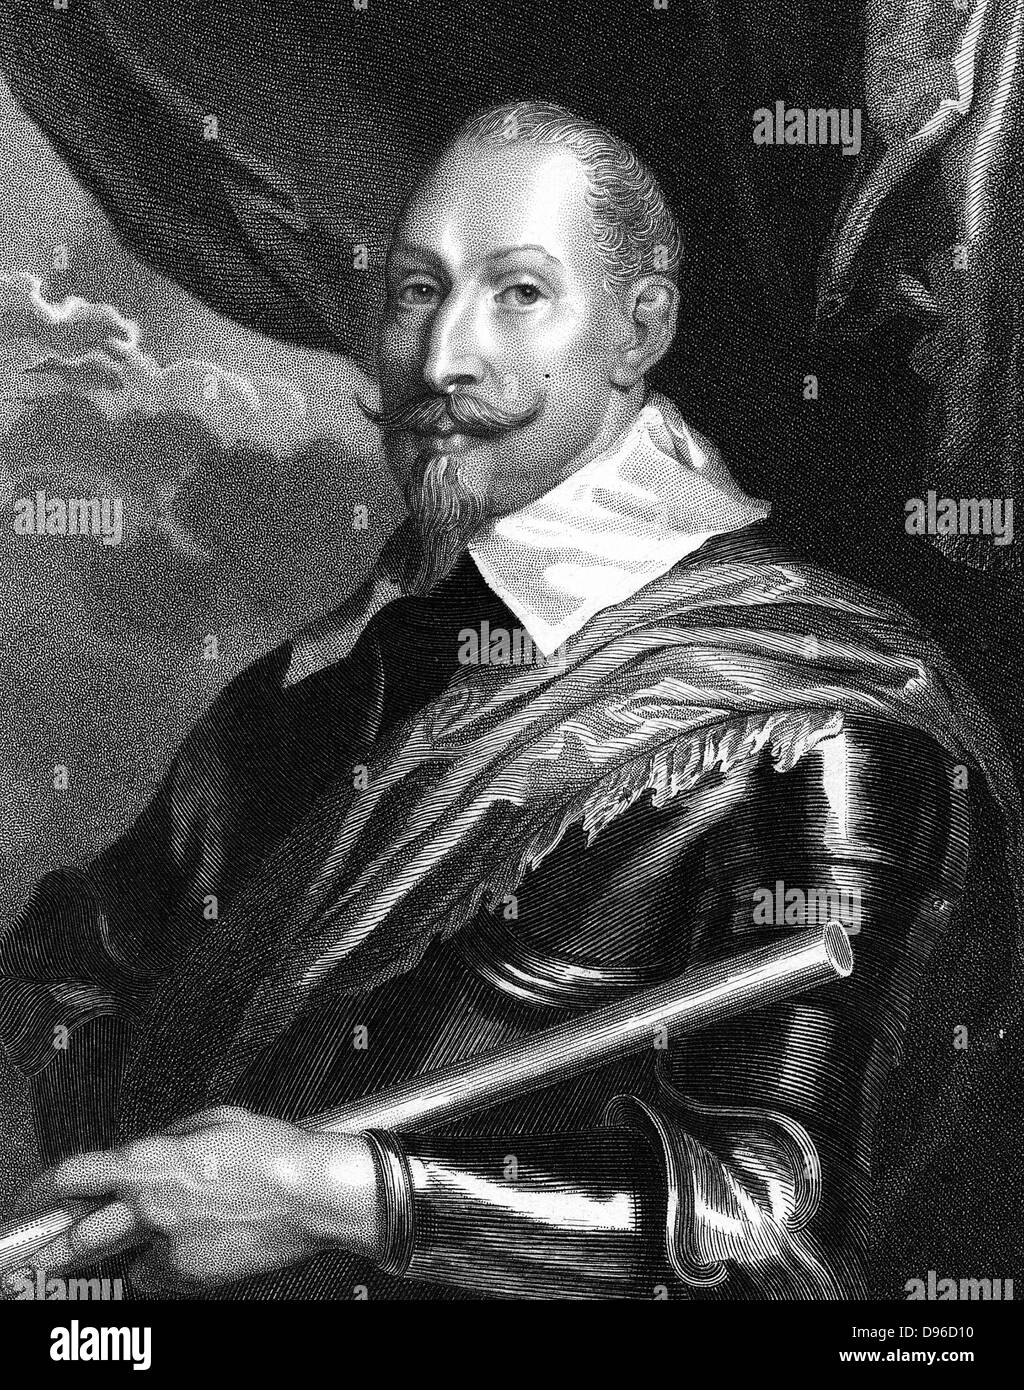 Gustav II Adolf (Gustavus Adolphus 1594-1632) King of Sweden from 1611. Leader of Protestants in Thirty Years War. Engraving after portrait by Van Dyck (Van Dyke). Stock Photo